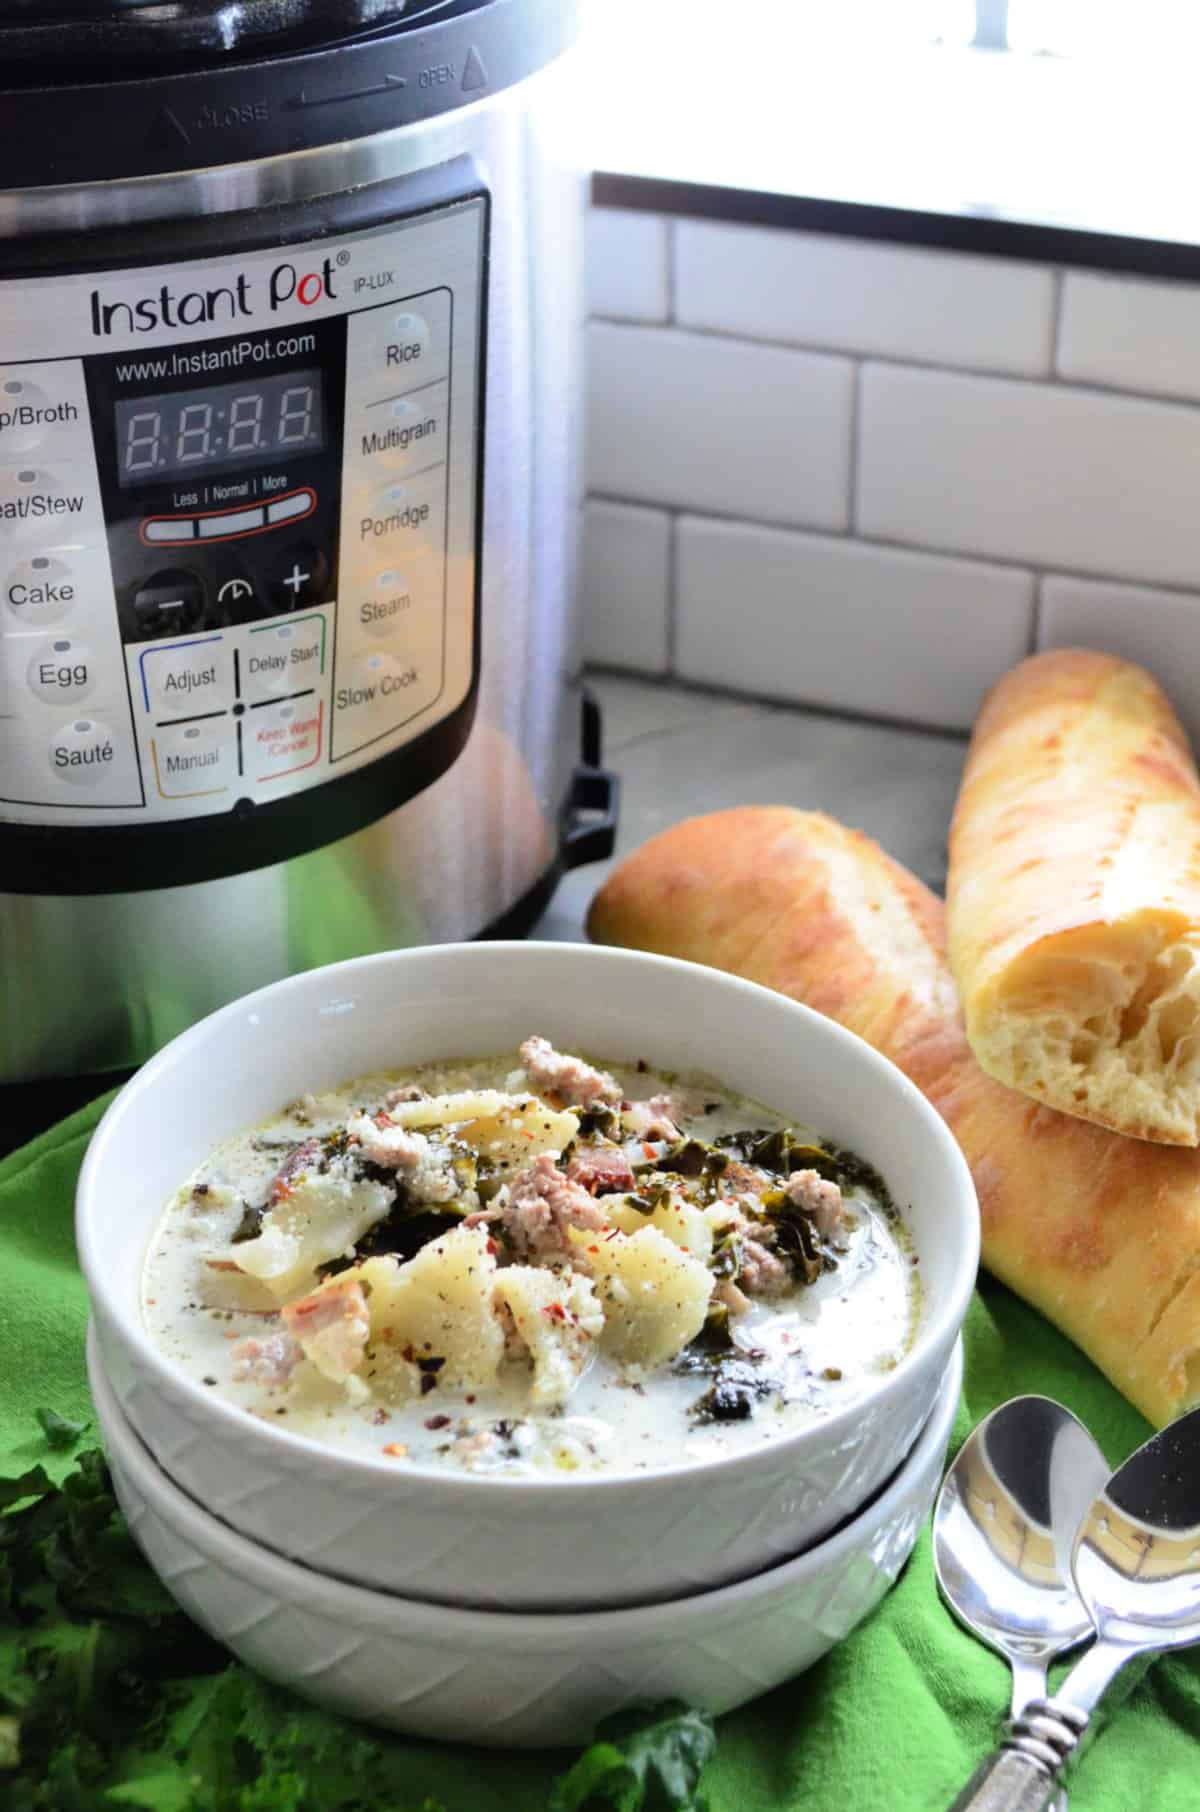 Bowl of creamy soup with potatoes and herbs on top in front of instant pot.